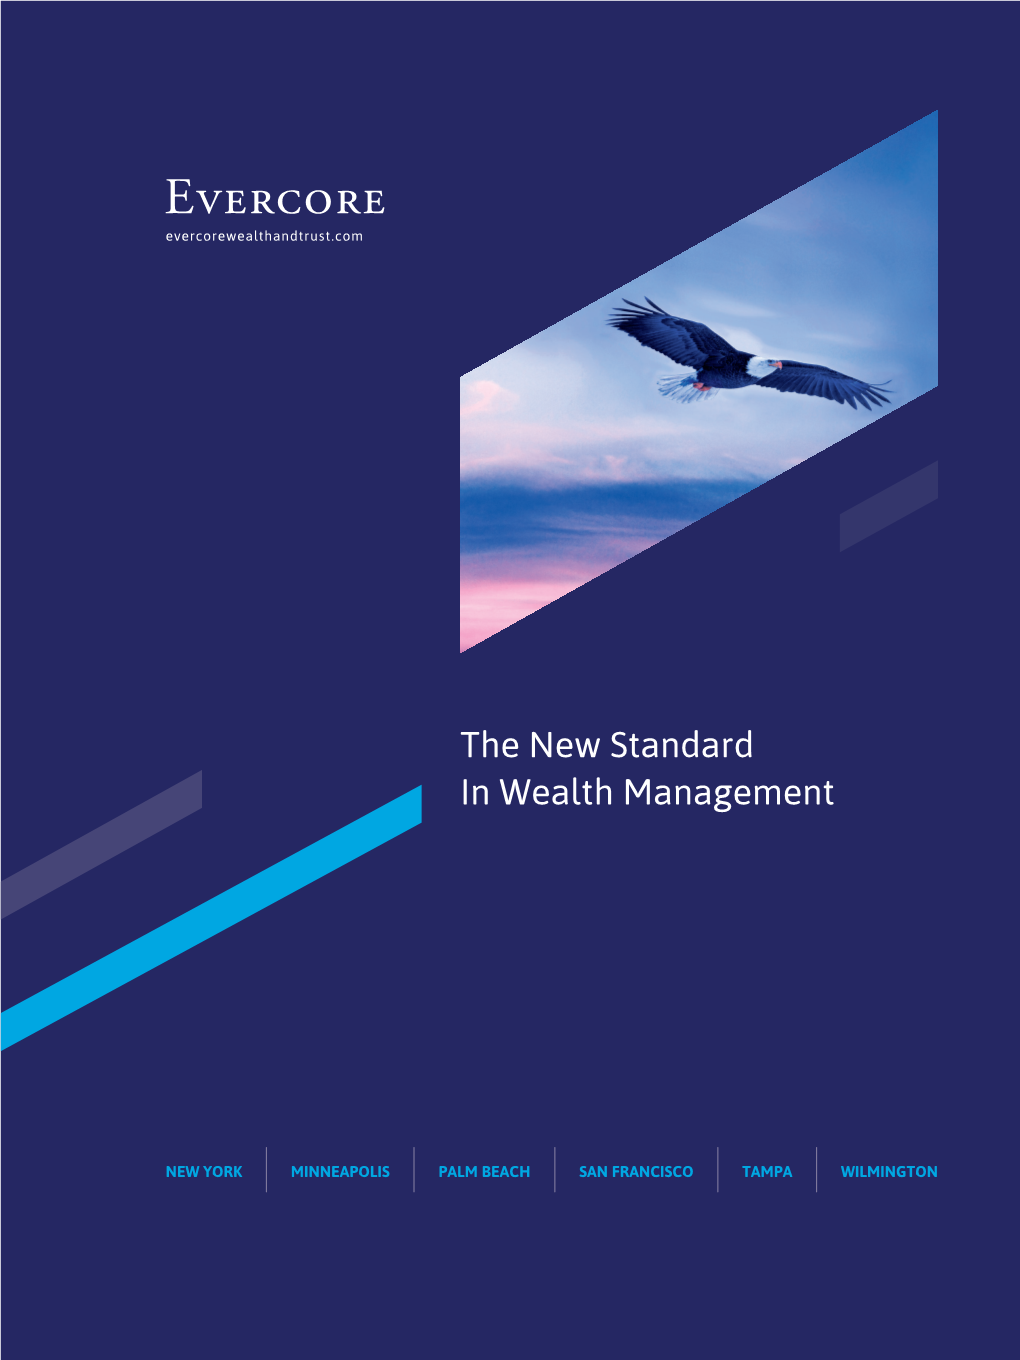 The New Standard in Wealth Management